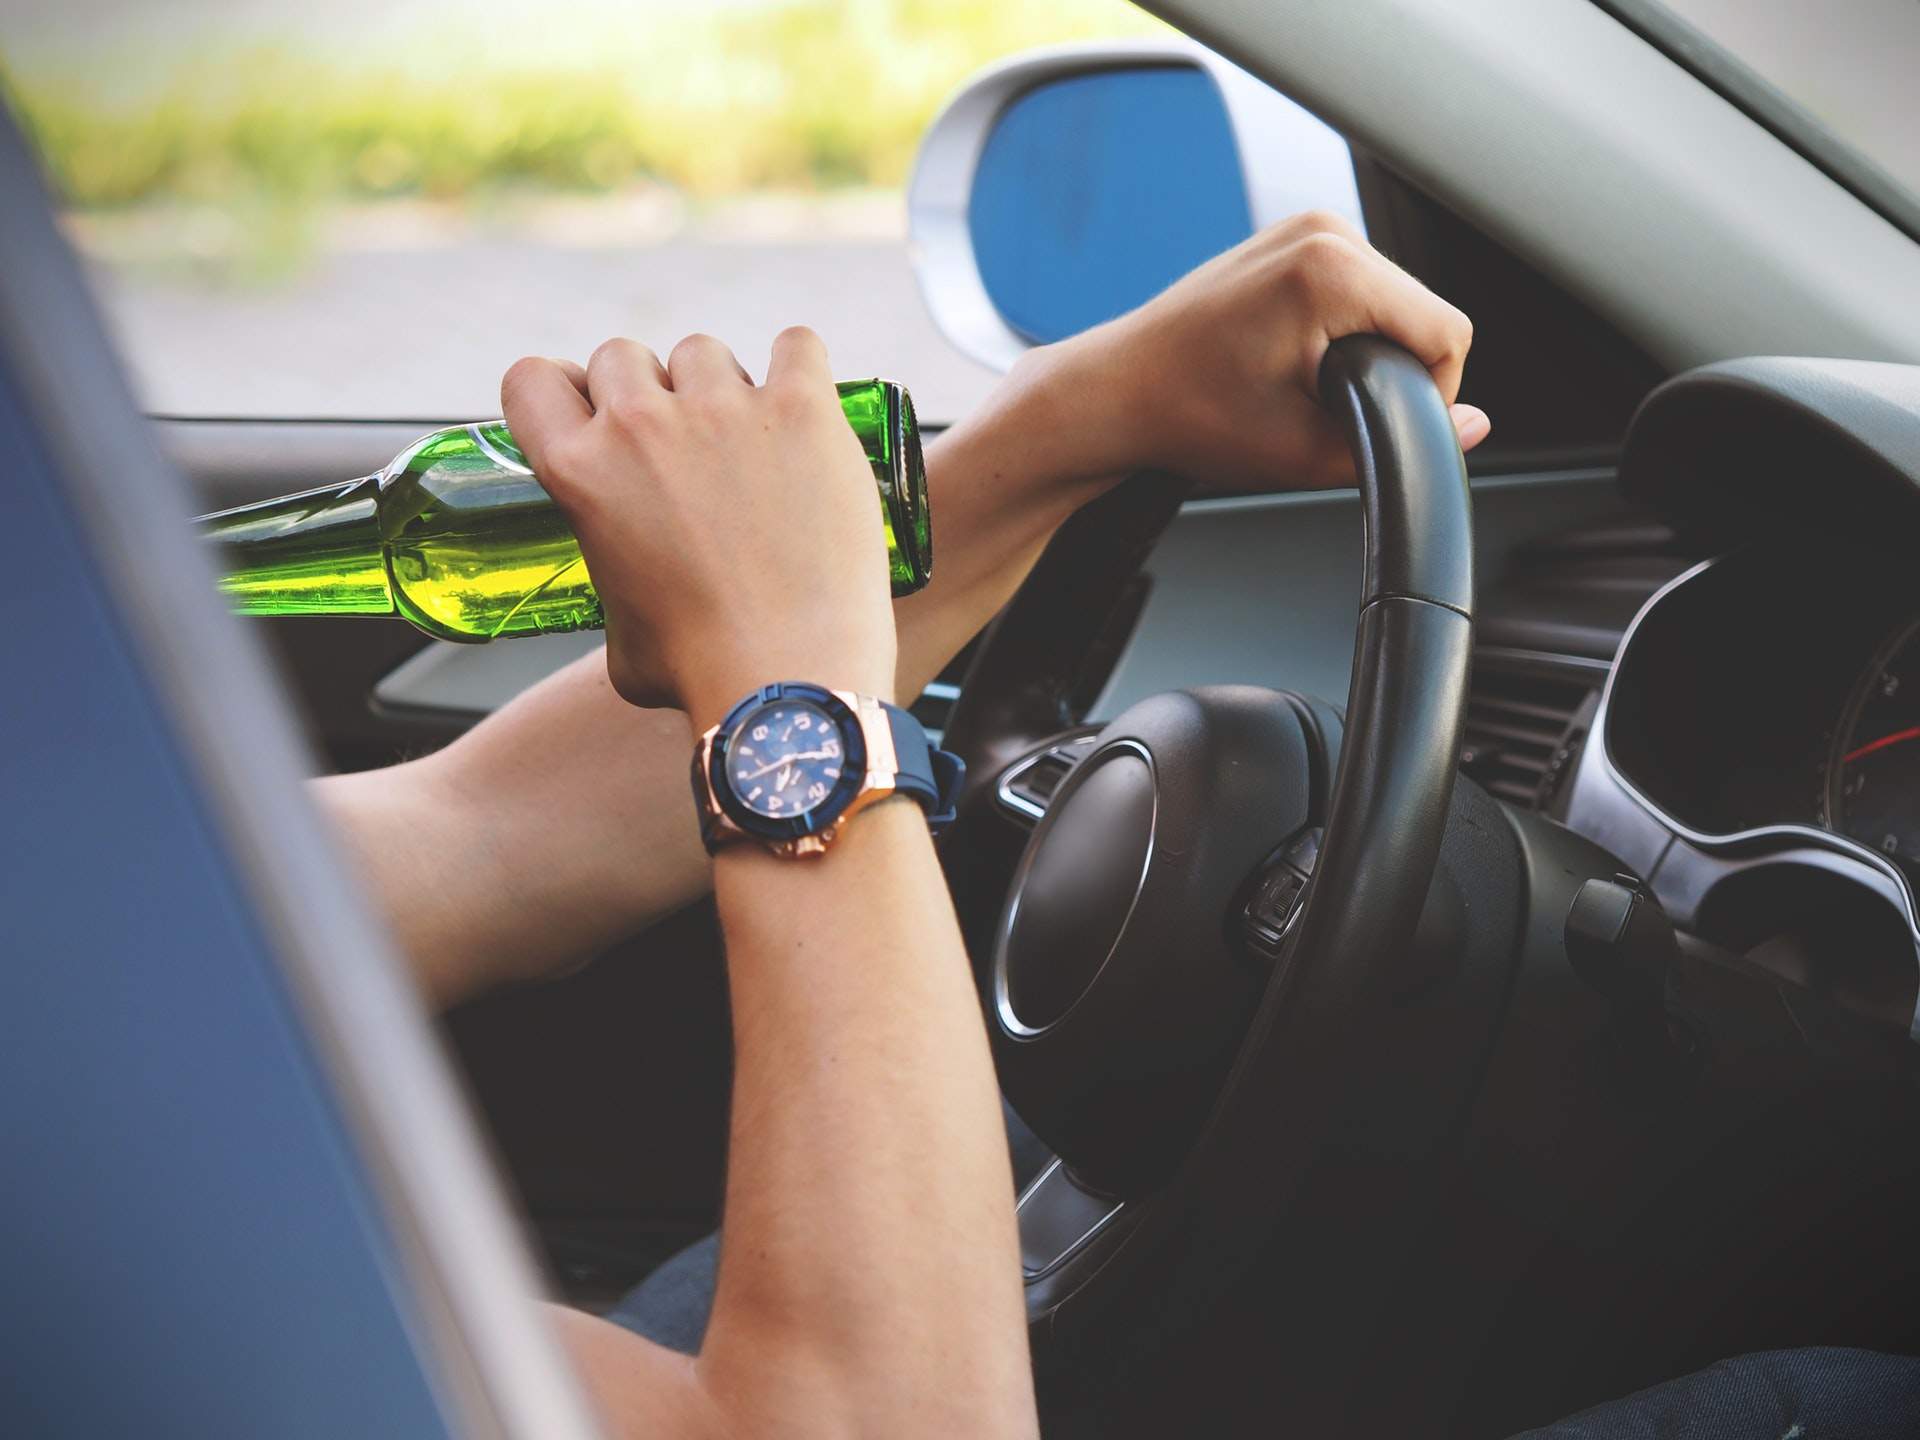 Will a Drunk Driving Crash Be Covered By the Insurance Company?